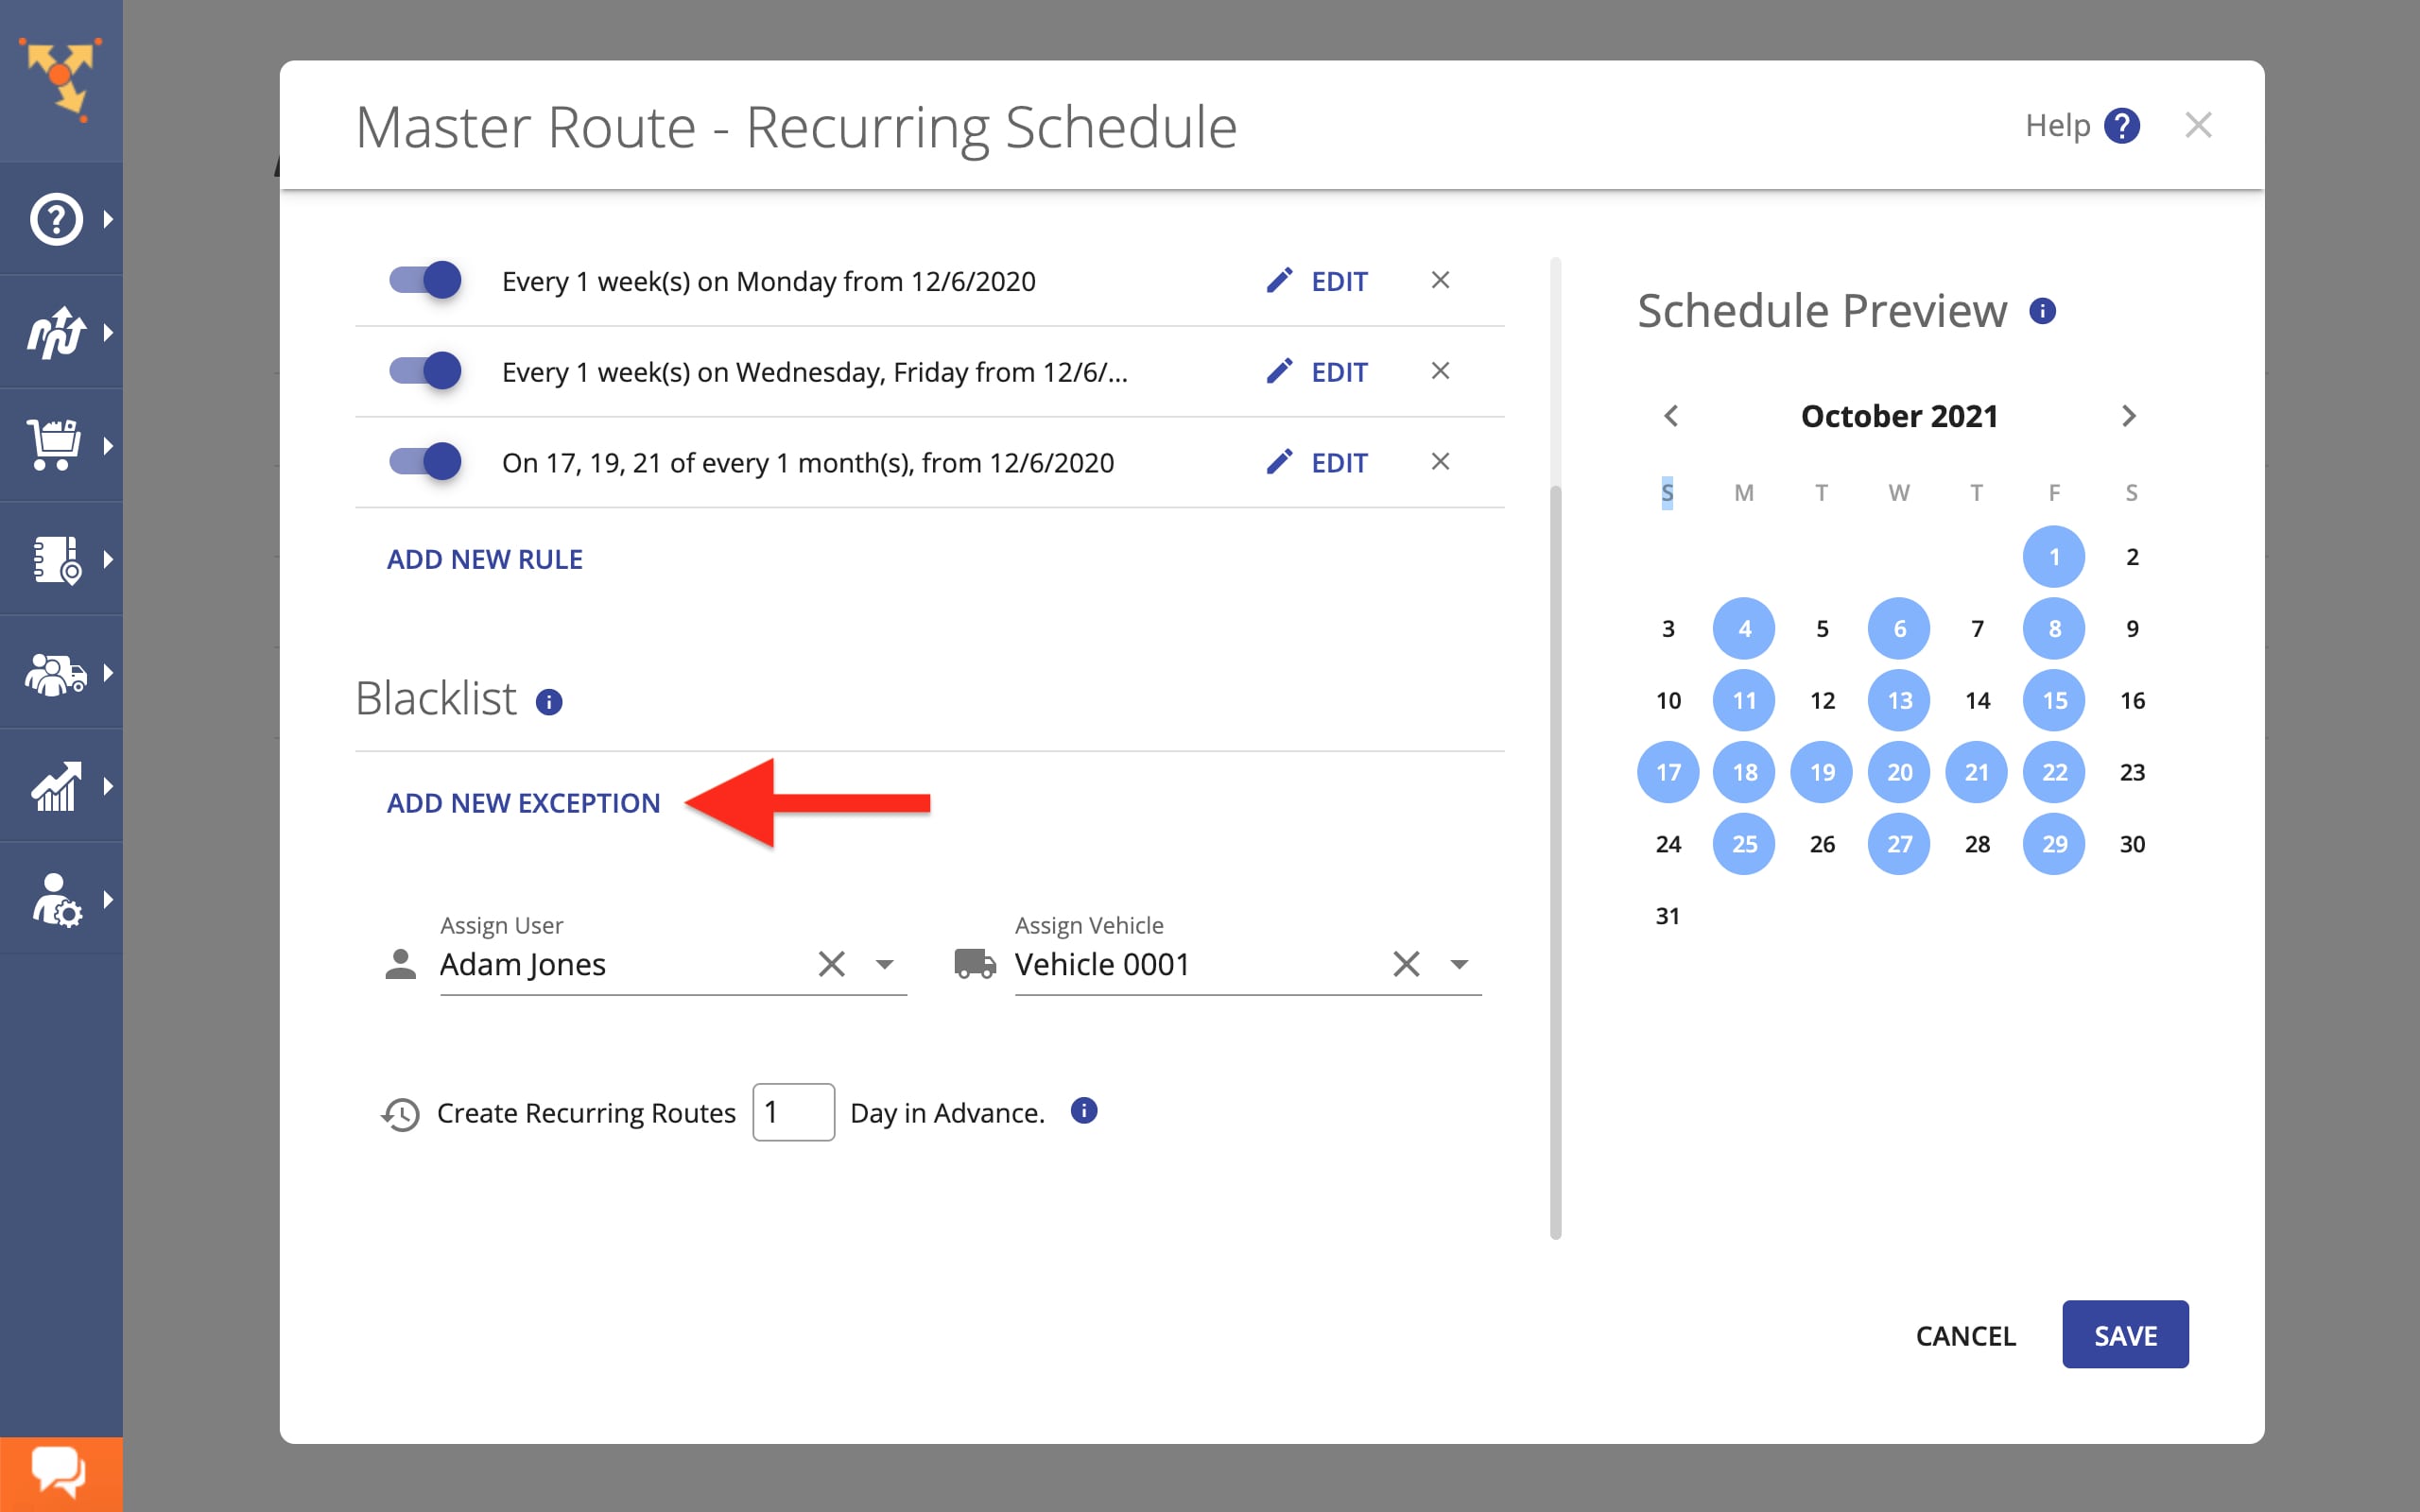 Add delivery route schedule exceptions to route blacklist & exclude non-working days from schedule.